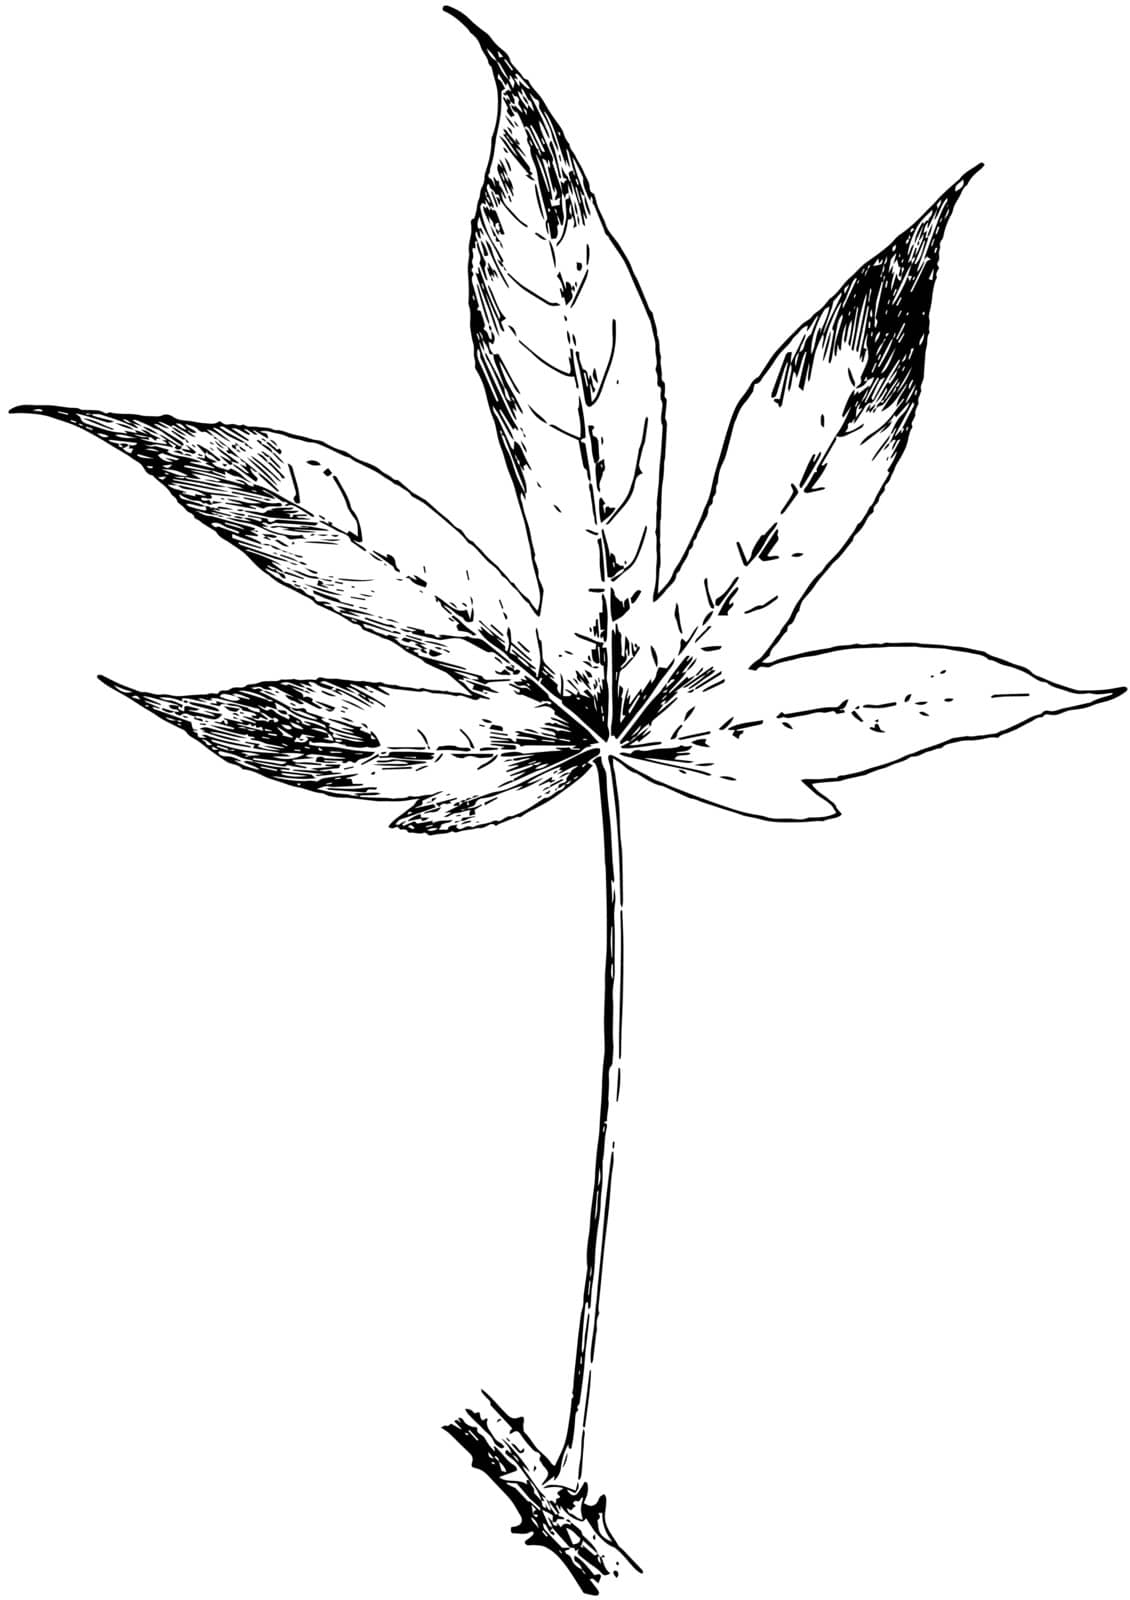 In this image there are some leaves deeply 5-7 lobed of a tree. The lobes are oblong and lance shaped. It is a very ornamental tree, vintage line drawing or engraving illustration.